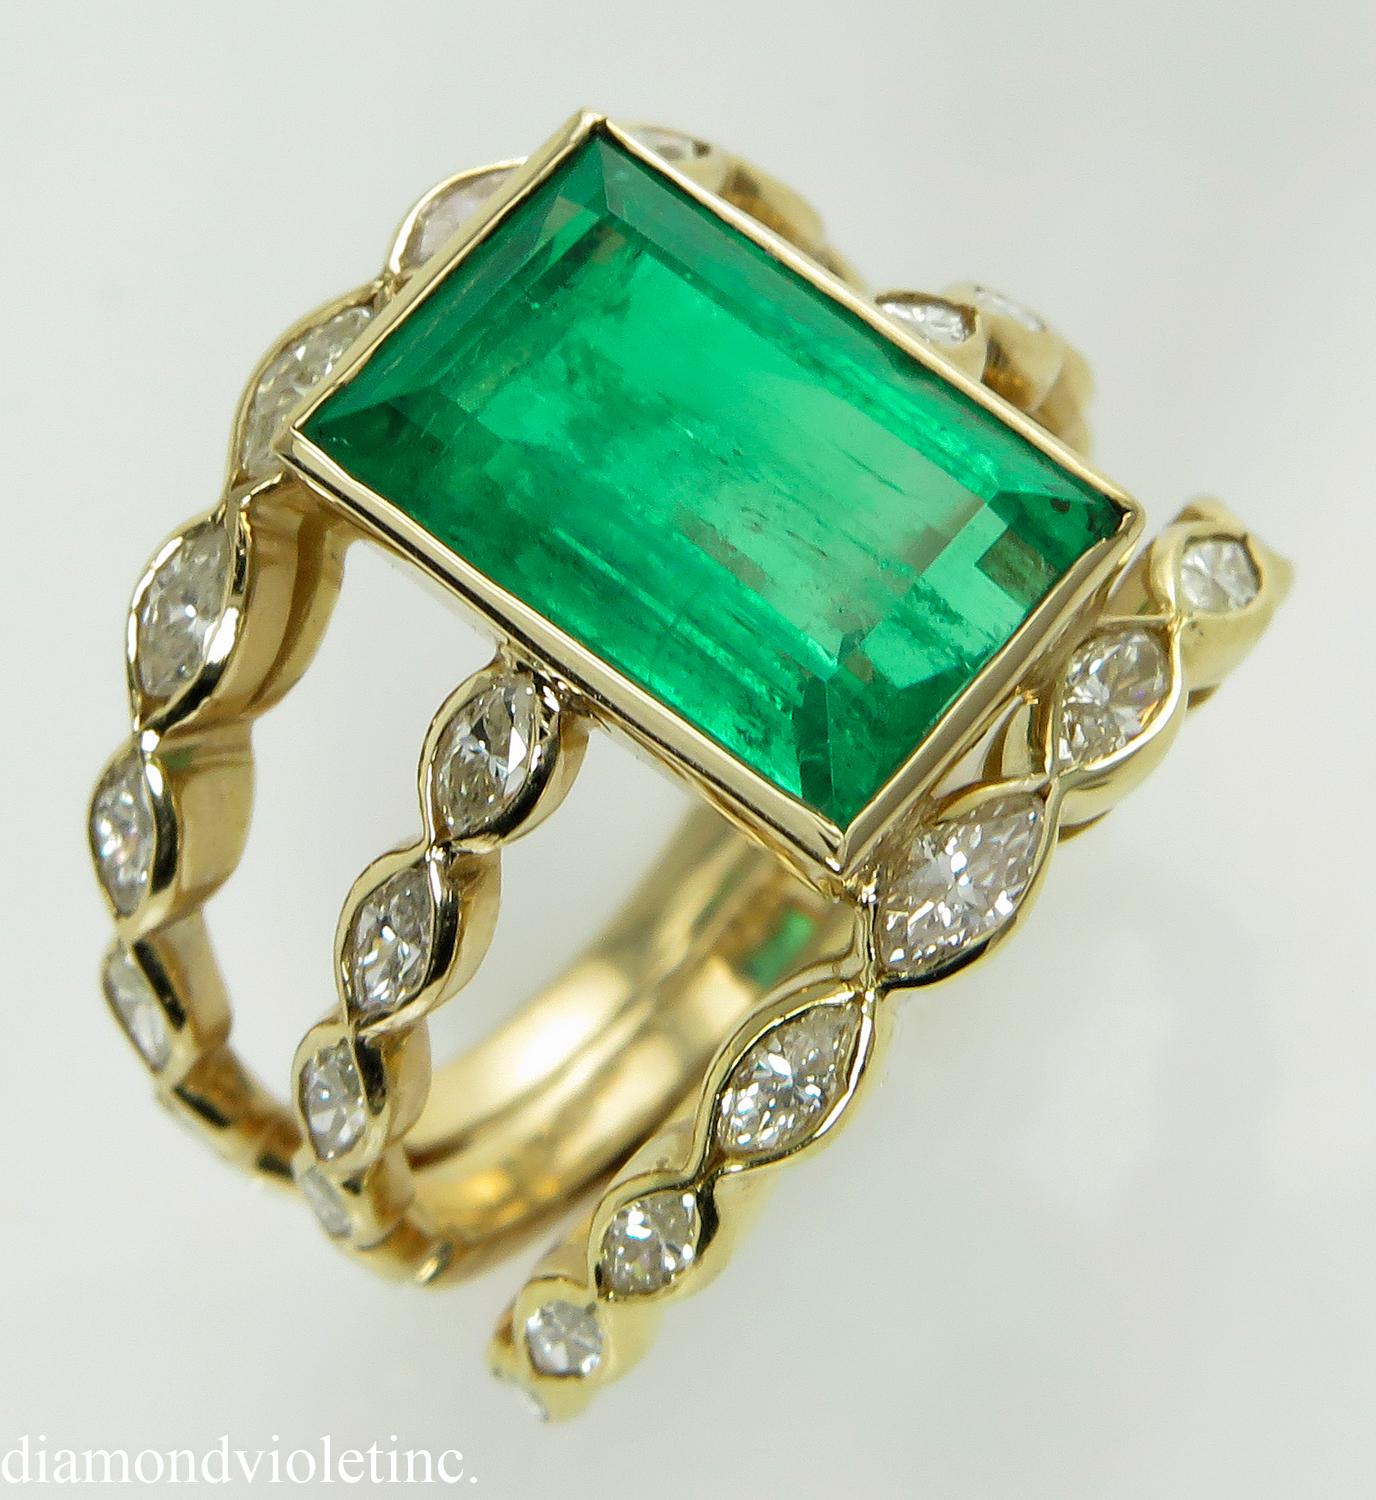 Gorgeous Timeless Estate Vintage 18k Yellow Gold (tested) Green Emerald and Diamond Engagement Ring. The Center Stone is GIA Certified 3.50ct Natural COLOMBIAN Step cut Green Emerald. Mesmerizing Transparent Medium Green! The measurements of the